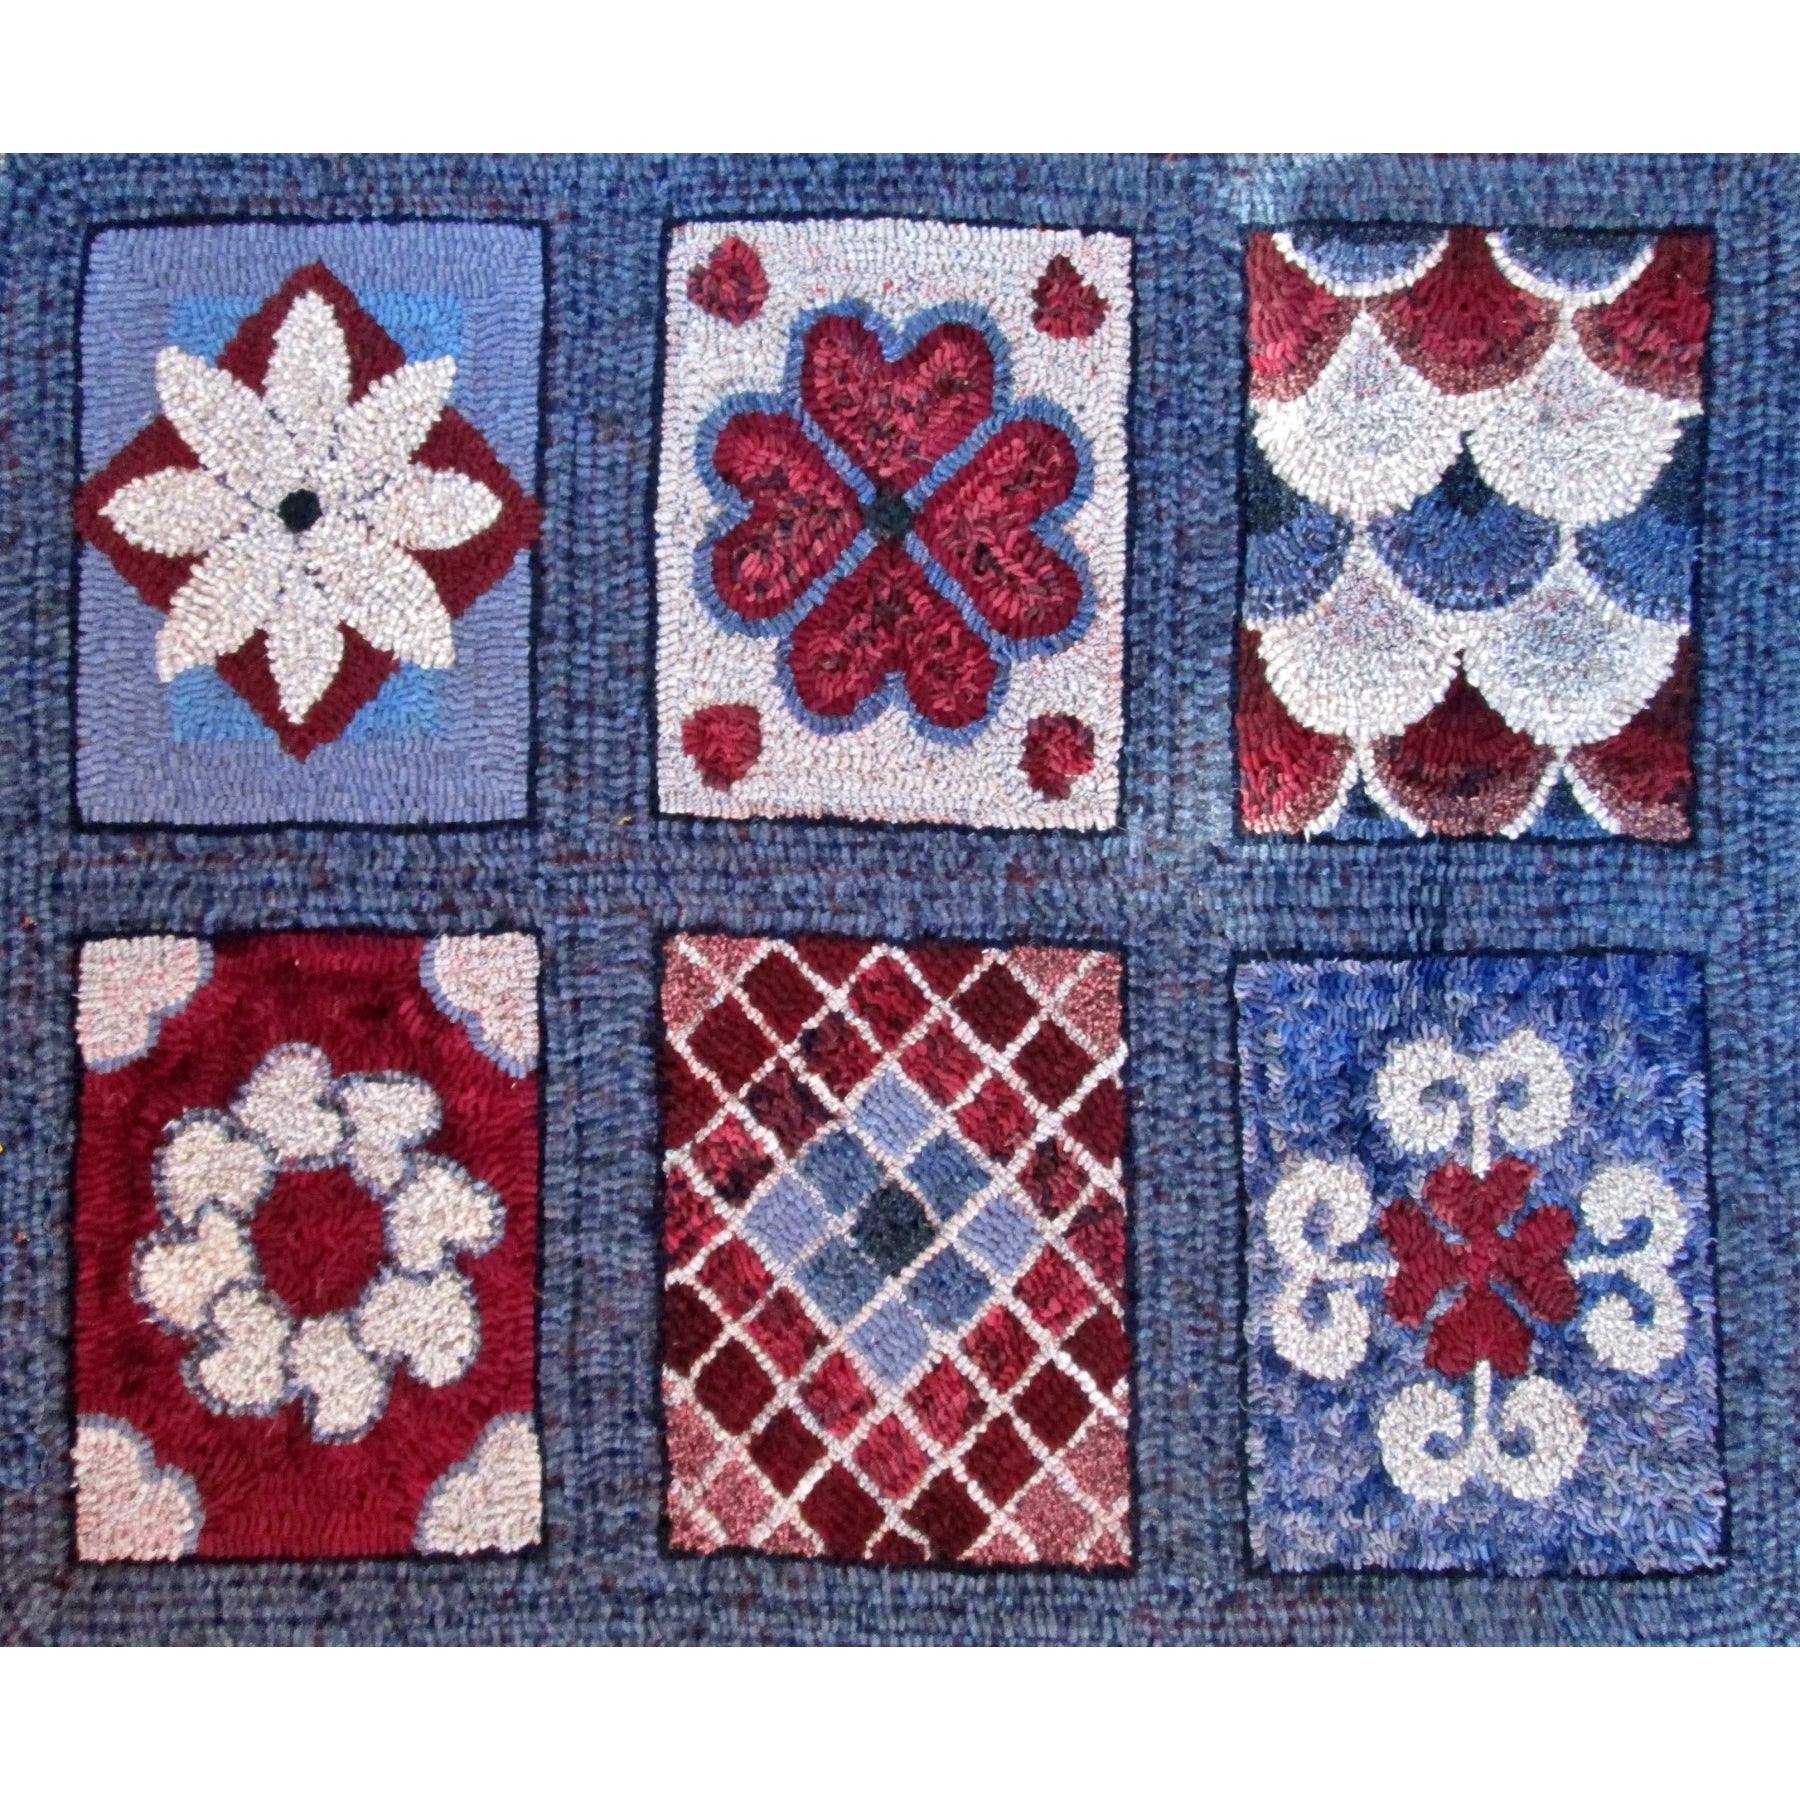 Quilt Squares, rug hooked by Connie Bradley